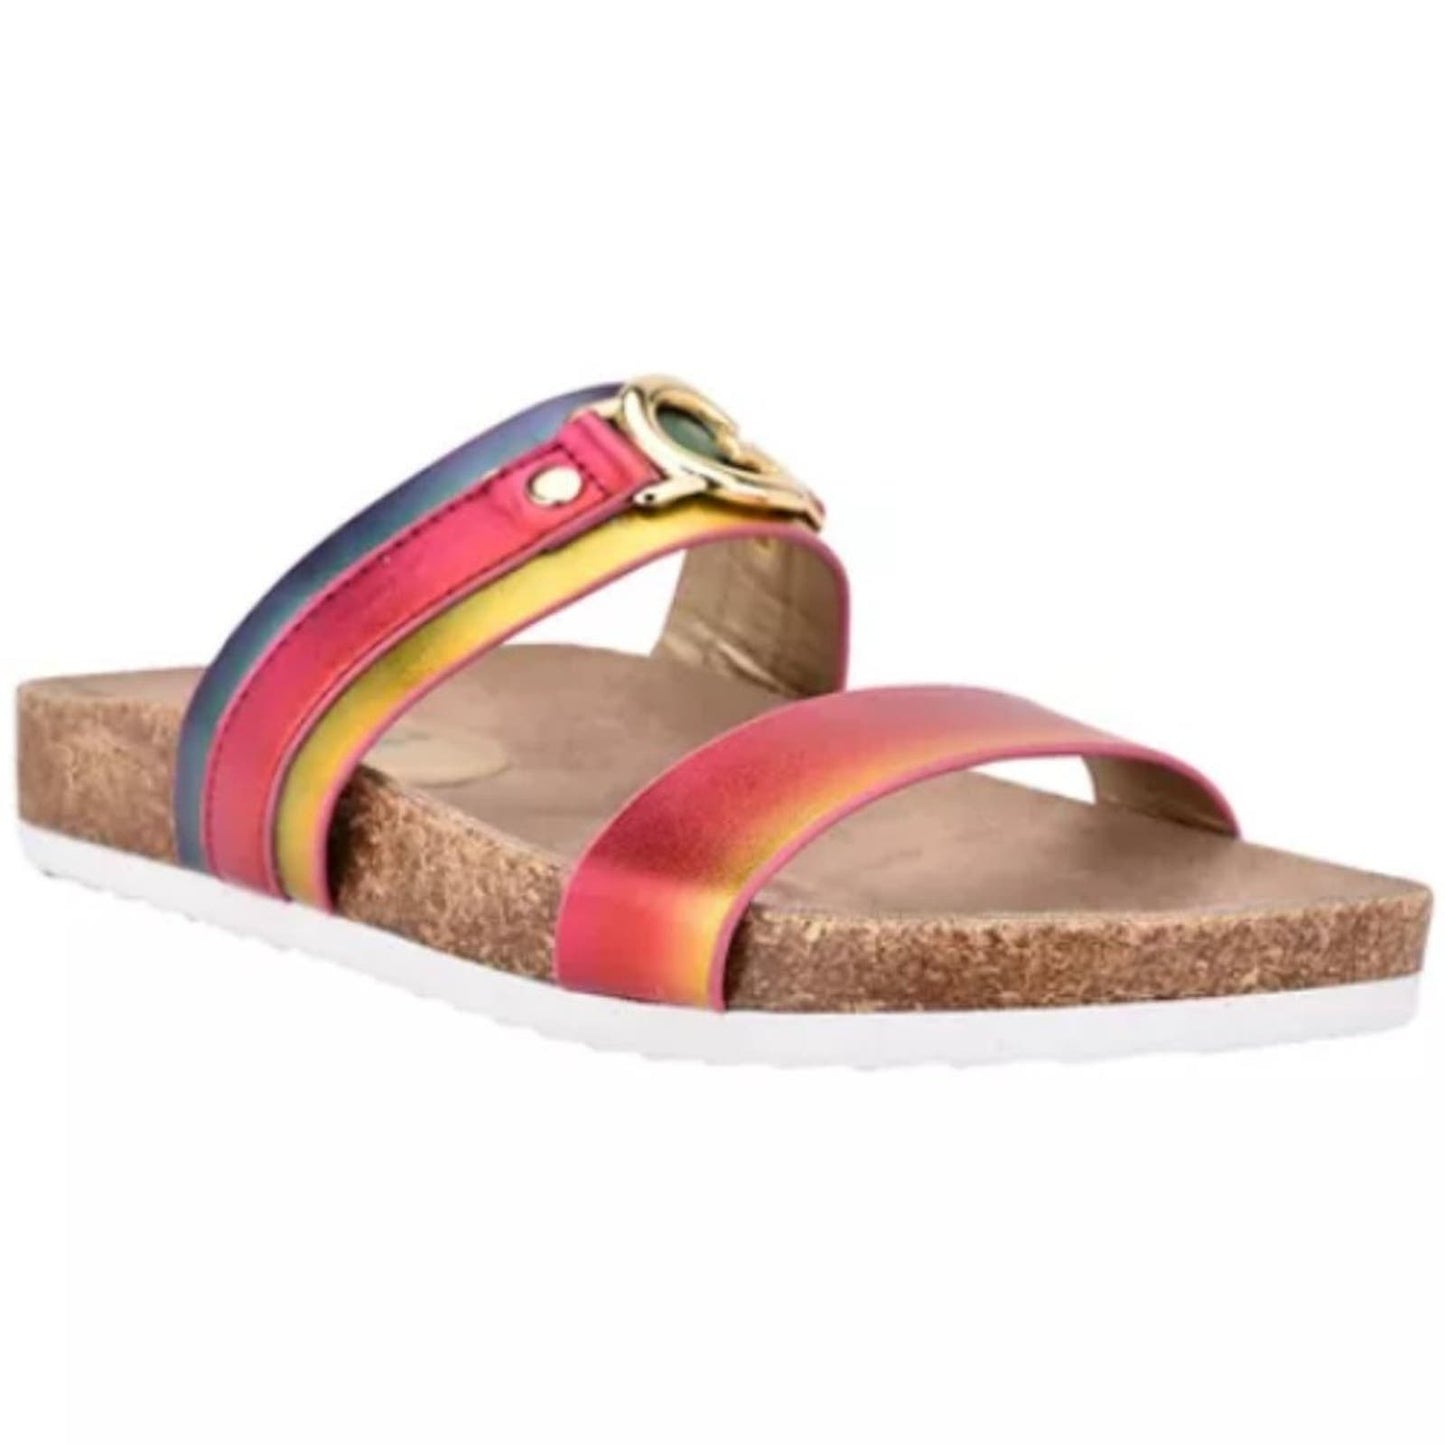 Macy's GBG Systi Sandals in Rainbow Ombre Size 8